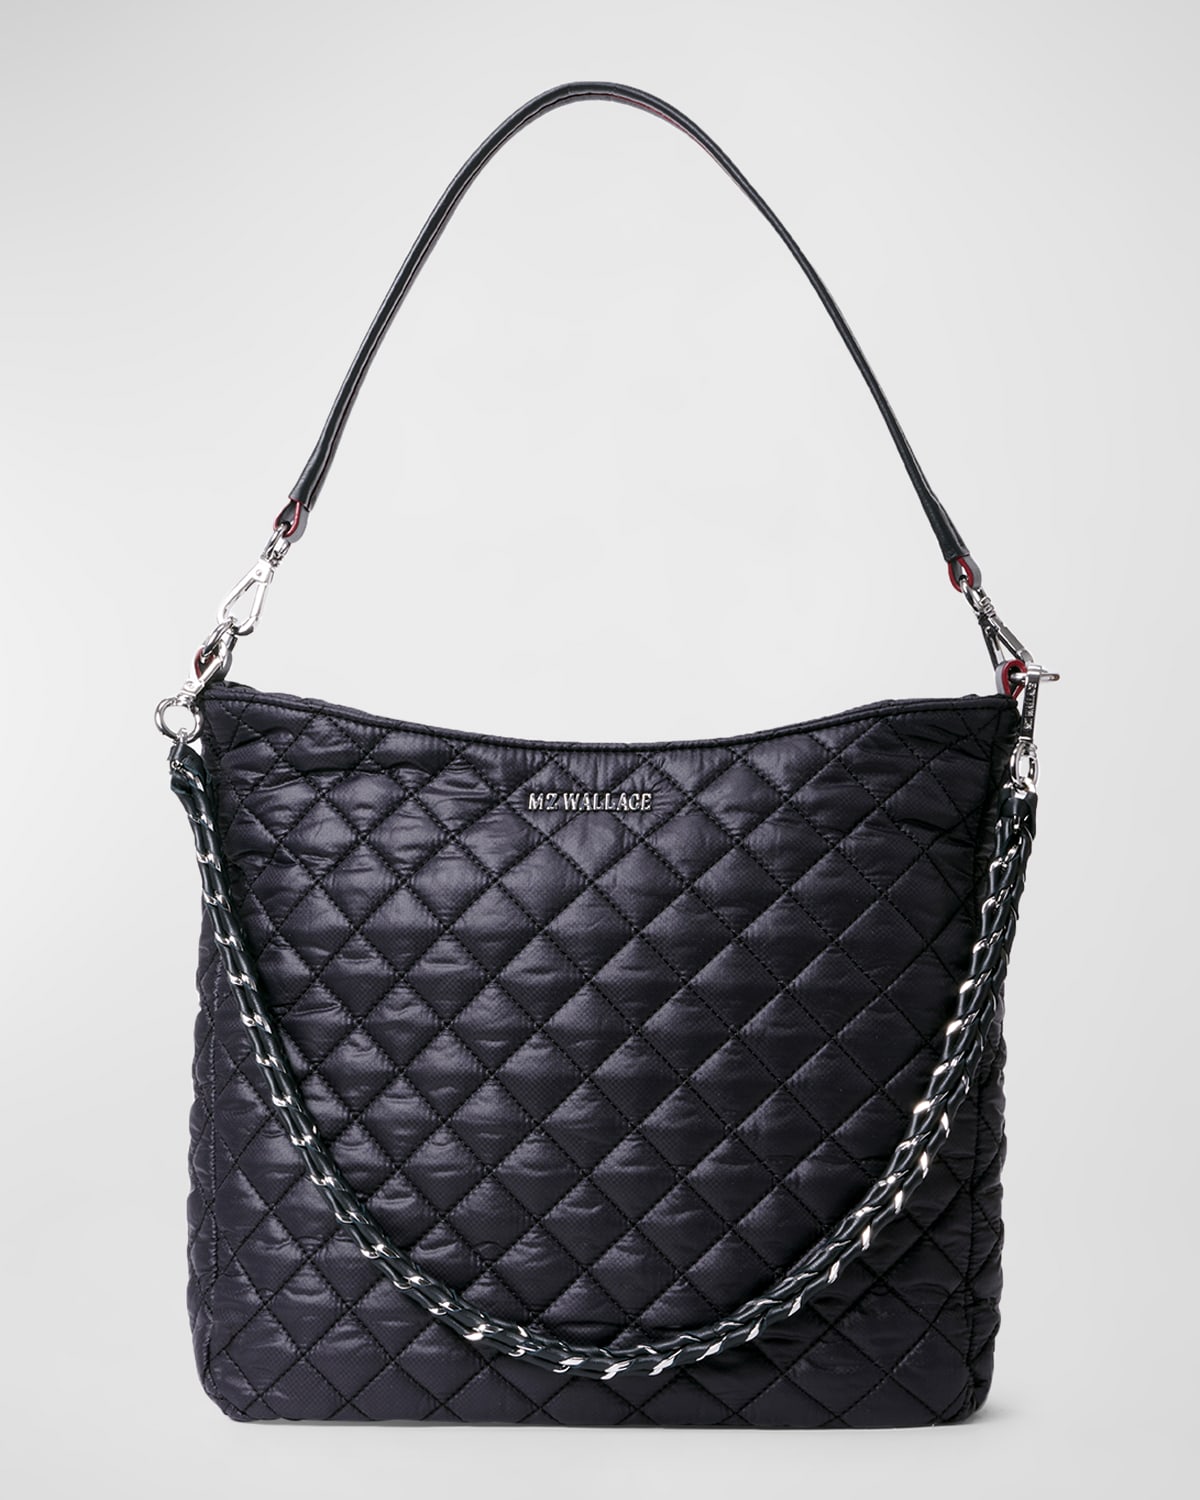 MZ WALLACE CROSBY QUILTED HOBO SHOULDER BAG